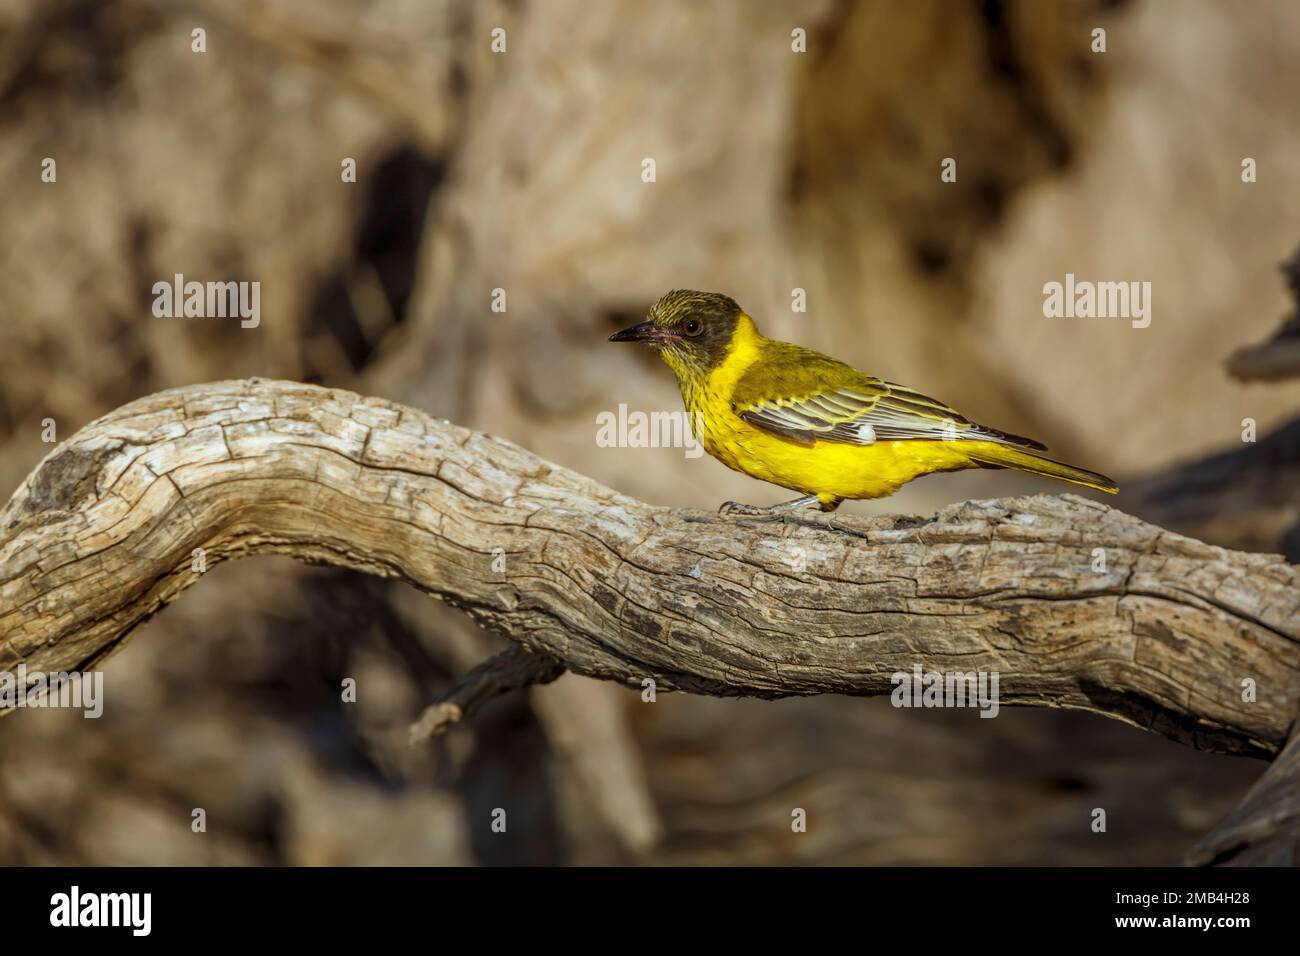 African Black headed Oriole standing on a log side view in Kgalagadi transfrontier park, South Africa; Specie Oriolus larvatus family of Oriolidae Stock Photo